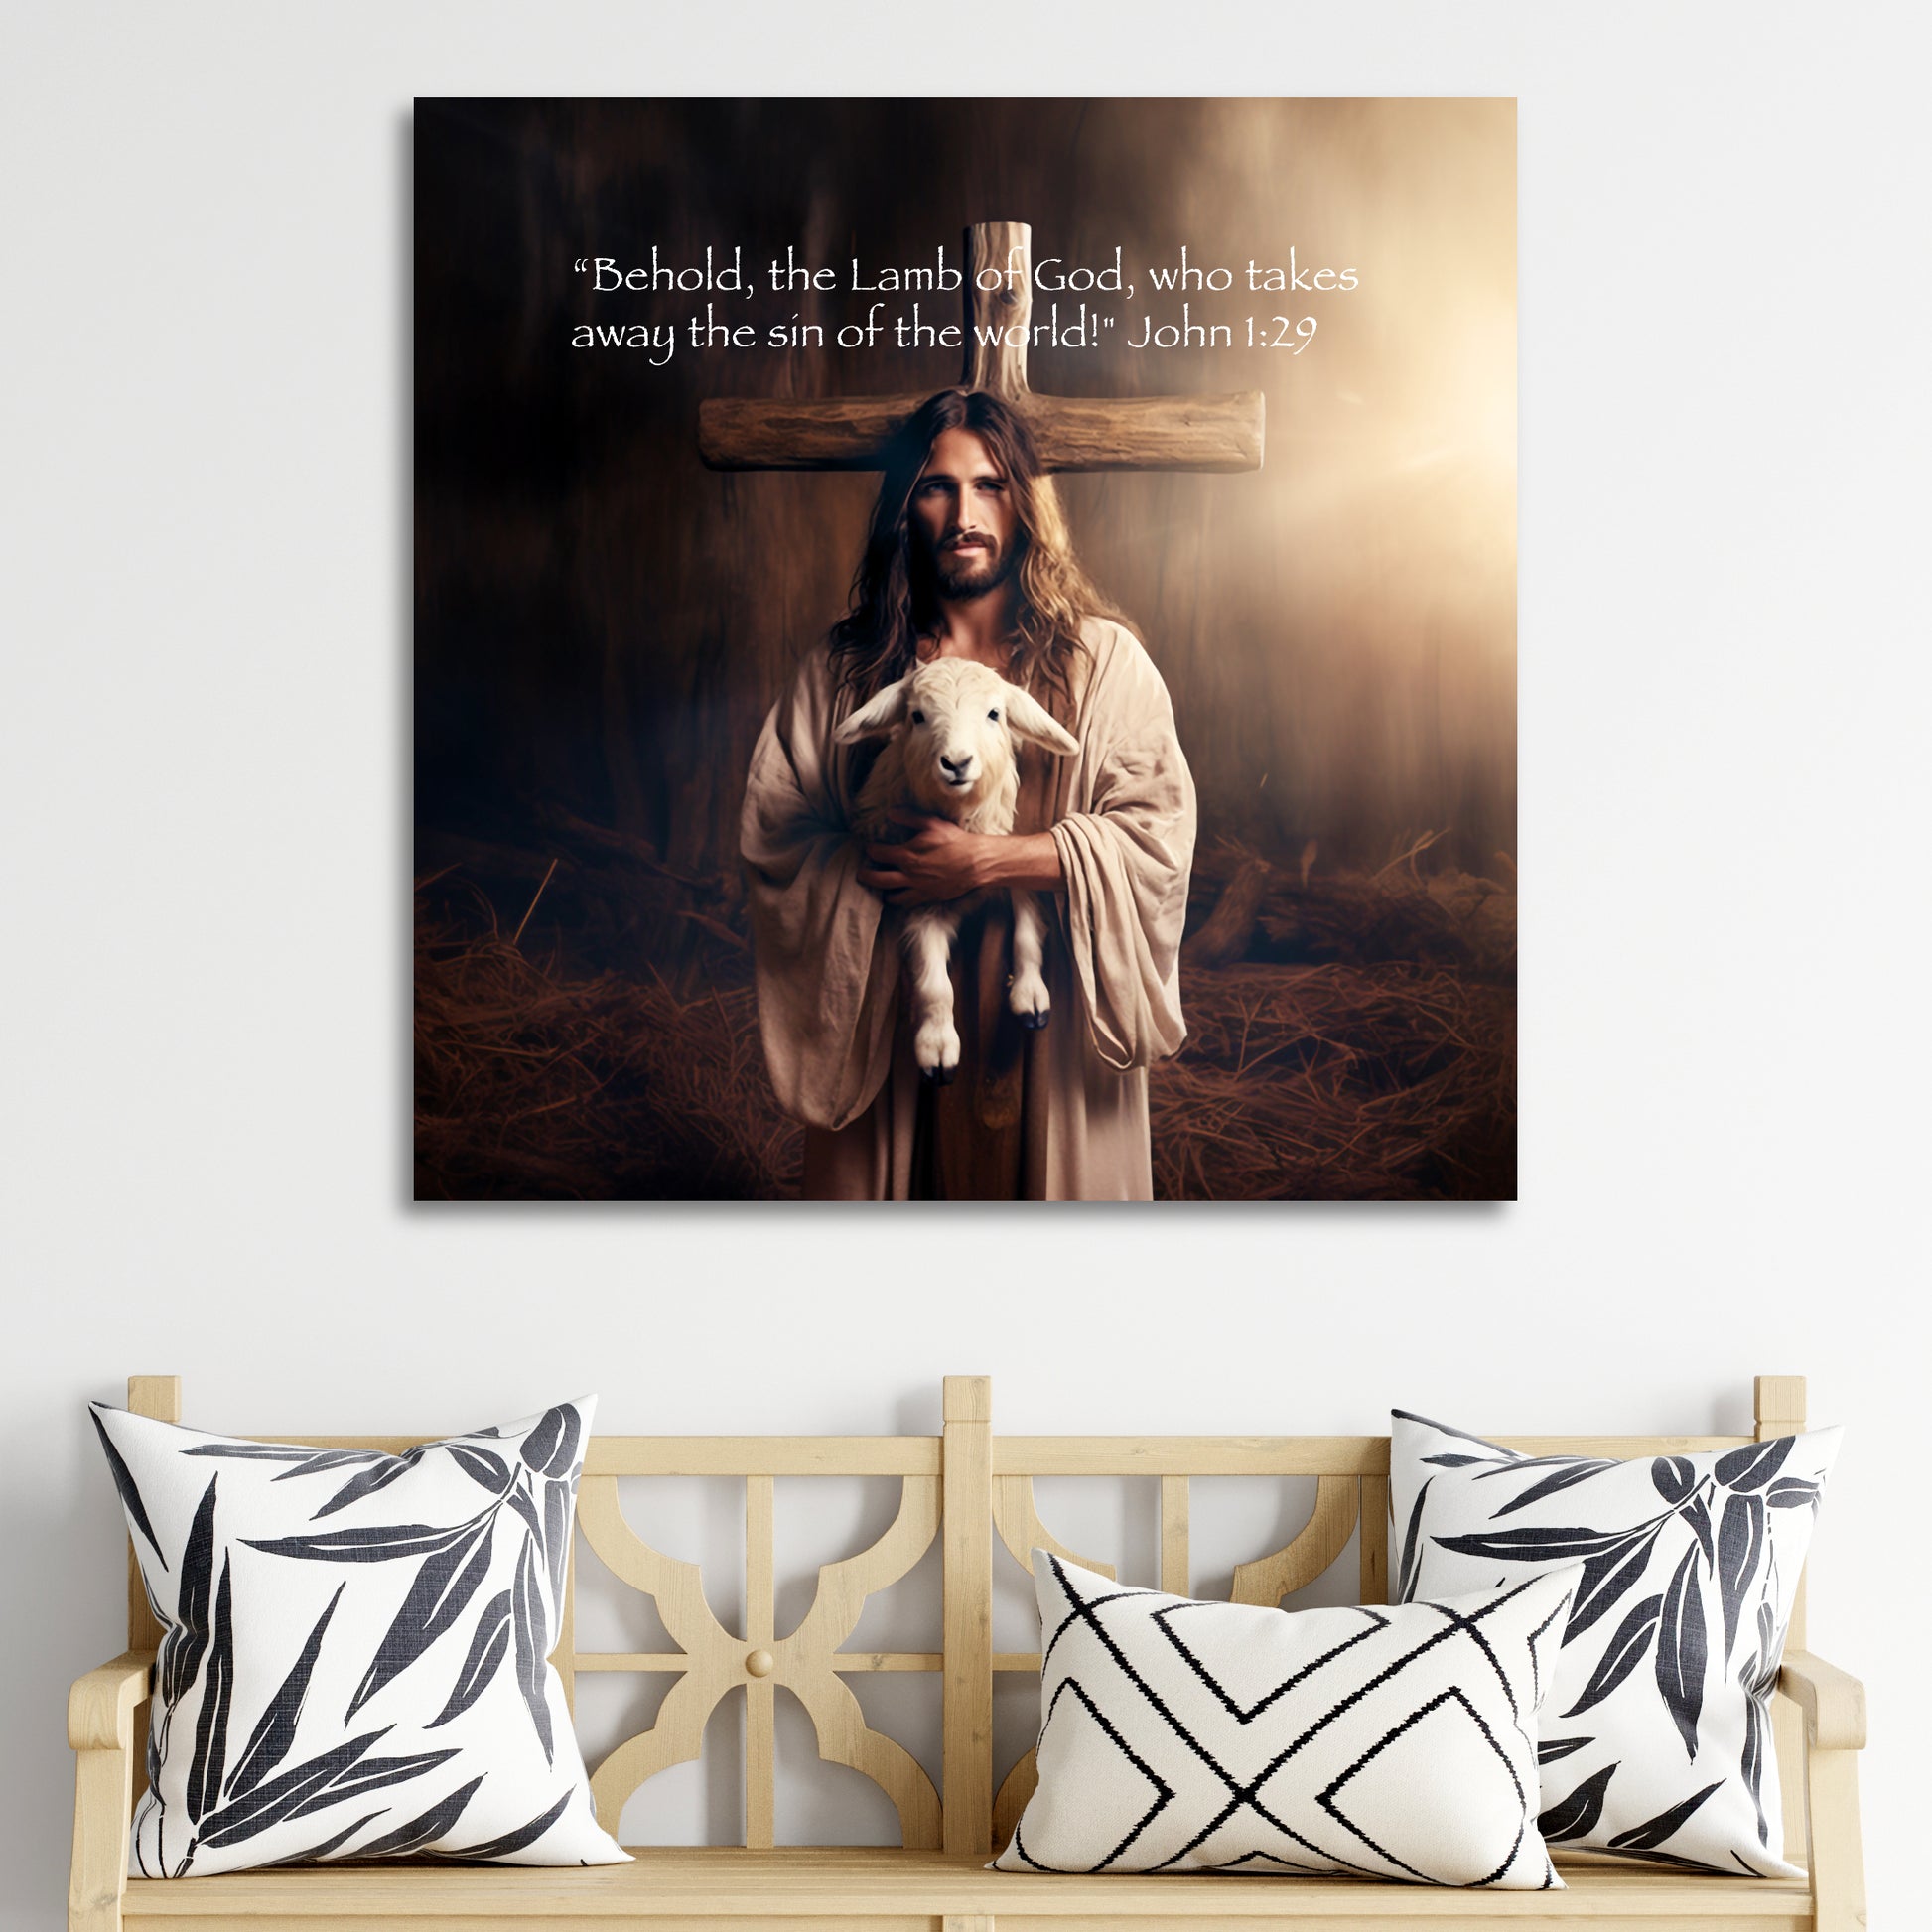 Scripture wall decor, gift ideas for Christian